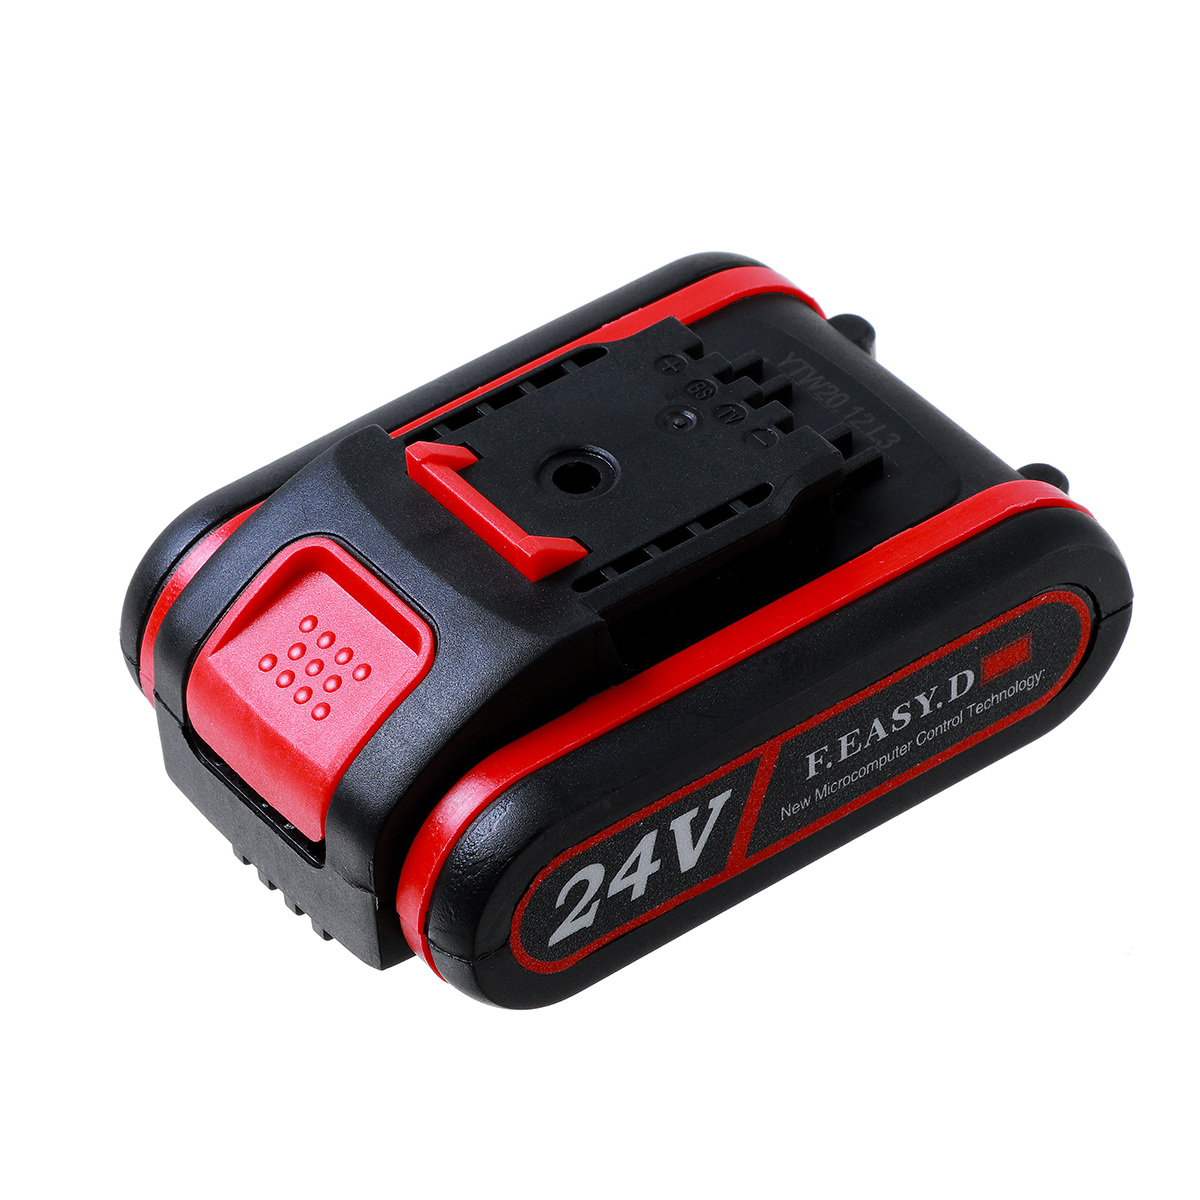 4-24V-Rechargeable-Cordless-Electric-Saw-Mini-Handheld-Chainsaw-Wood-Cutter-Tool-1801610-11